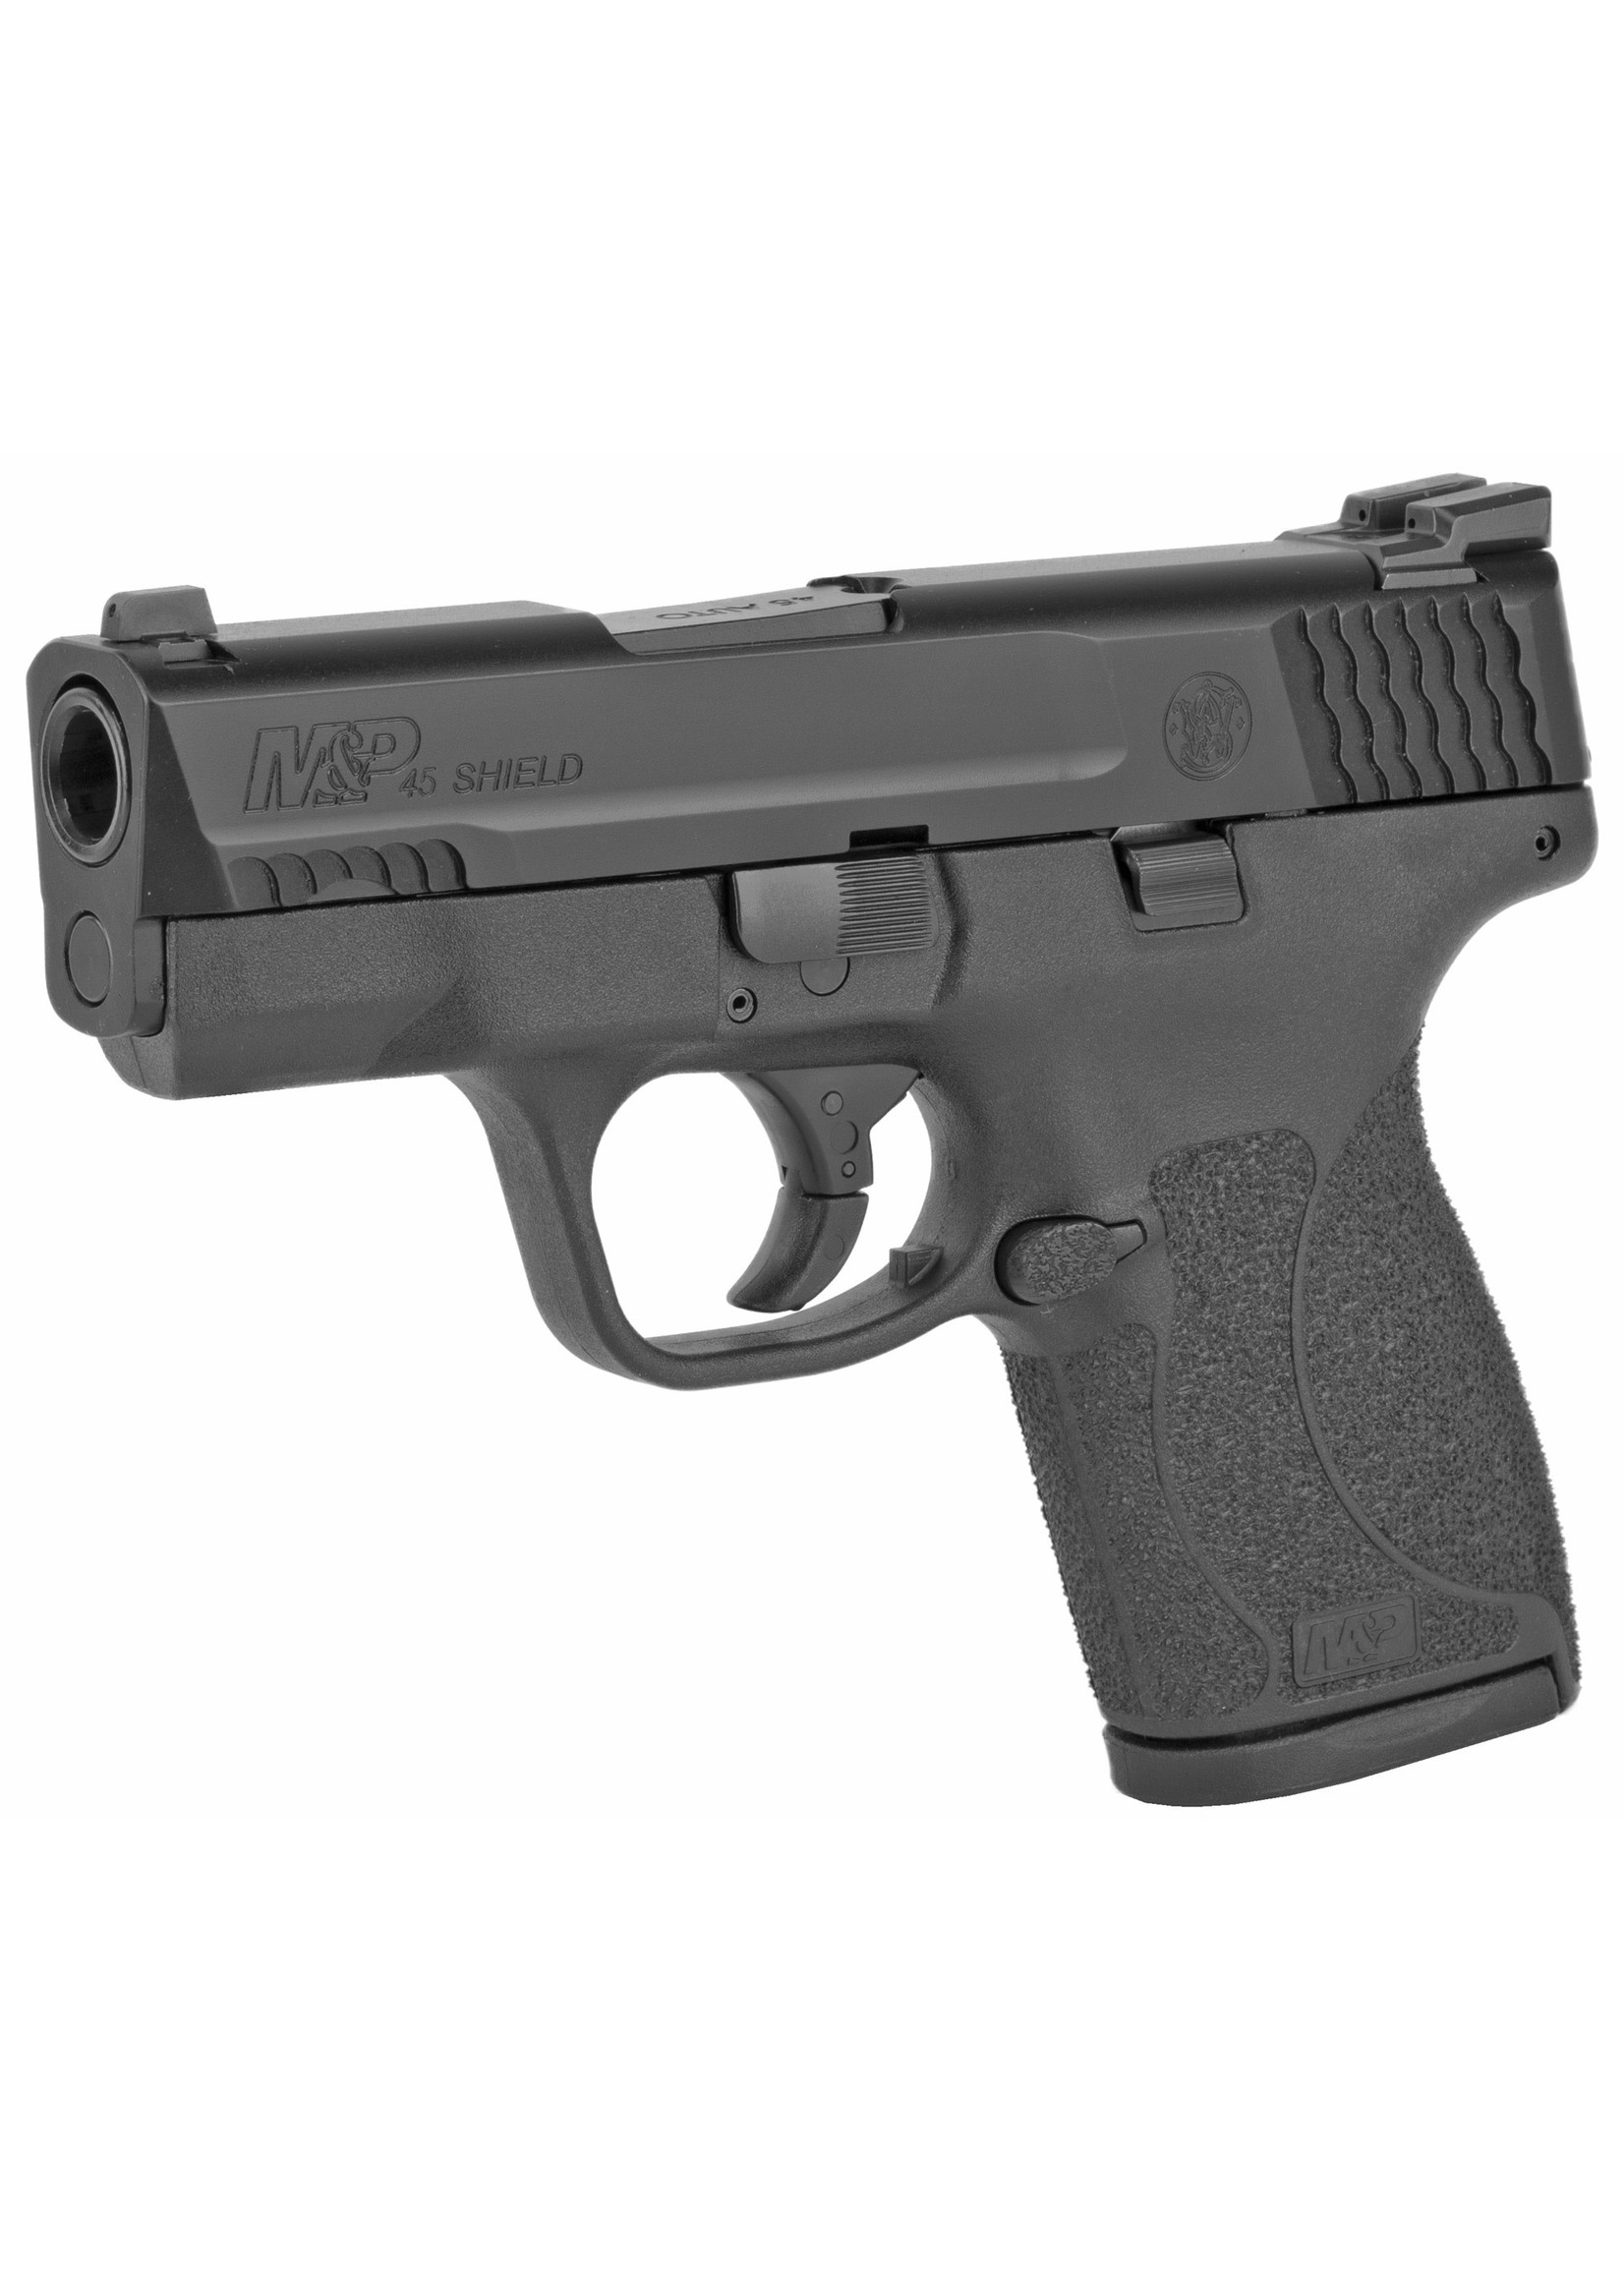 Smith and Wesson (S&W) Smith & Wesson M&P 45 Shield, 7+1, 3.3", Tritium Night Sights, 3 Mags